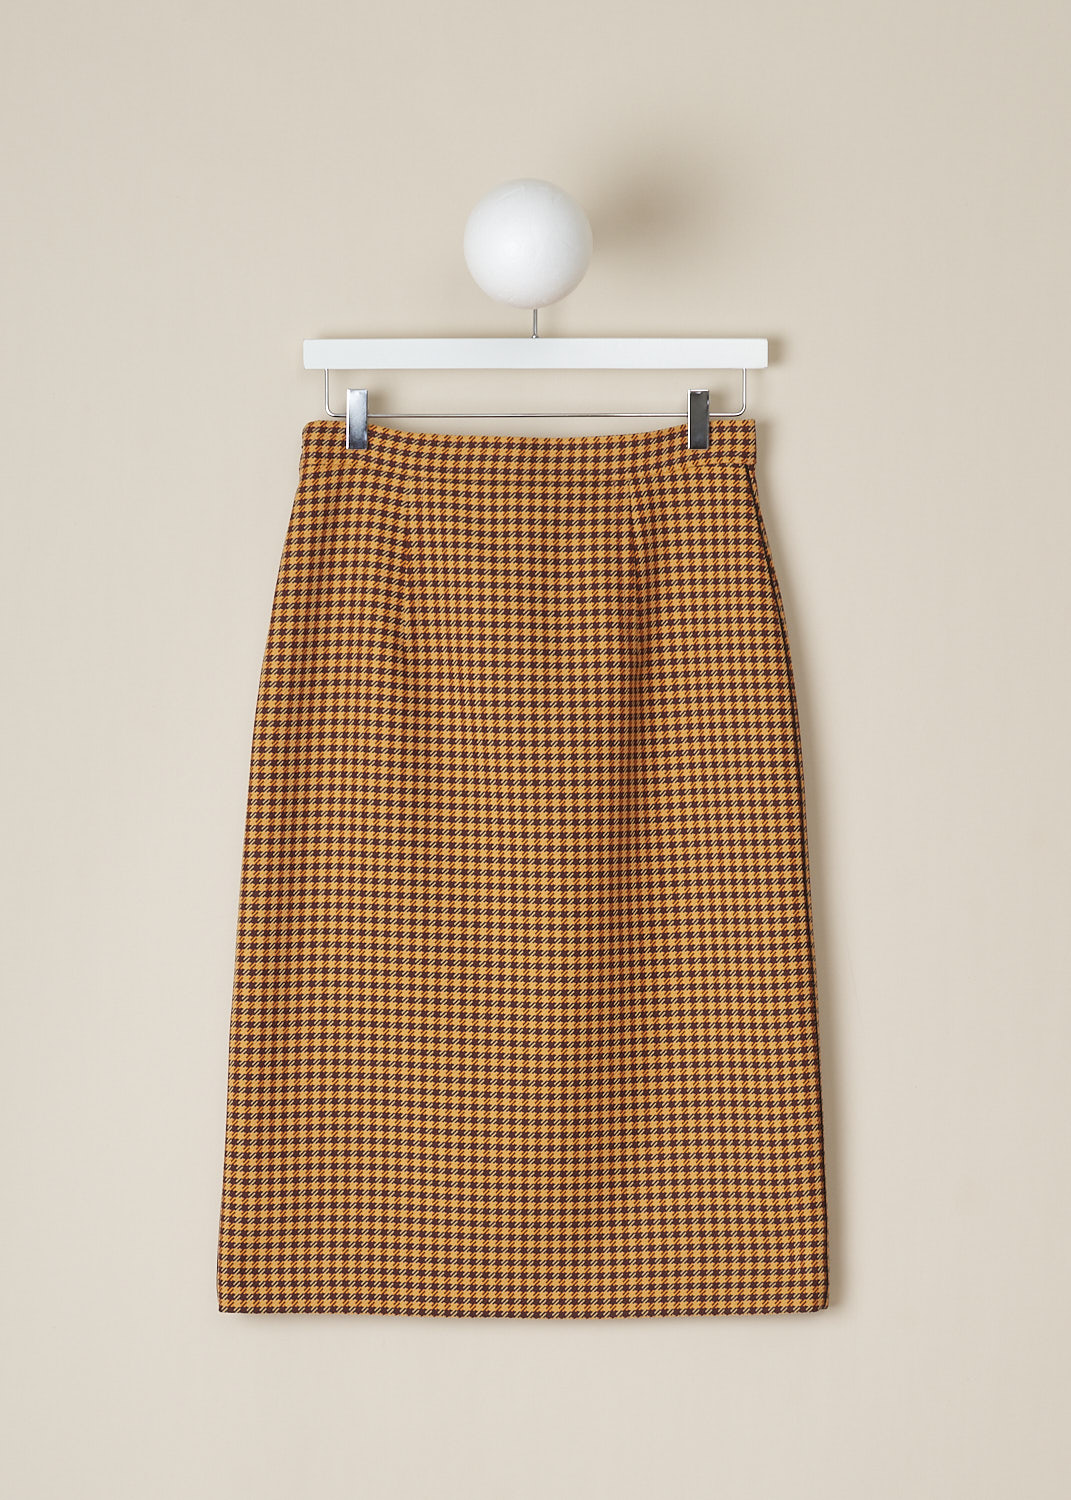 MARNI, ORANGE HOUNDSTOOTH MIDI SKIRT, 
GOMA0554IU_UTP730_CHR79, Orange, Print, Back, This high-waisted orange Houndstooth midi skirt has a narrow waistband and a concealed side zip that functions as the closure option. Black piping runs along the side seams. In the front, the skirt has a high slit. The skirt has a straight hemline. 
